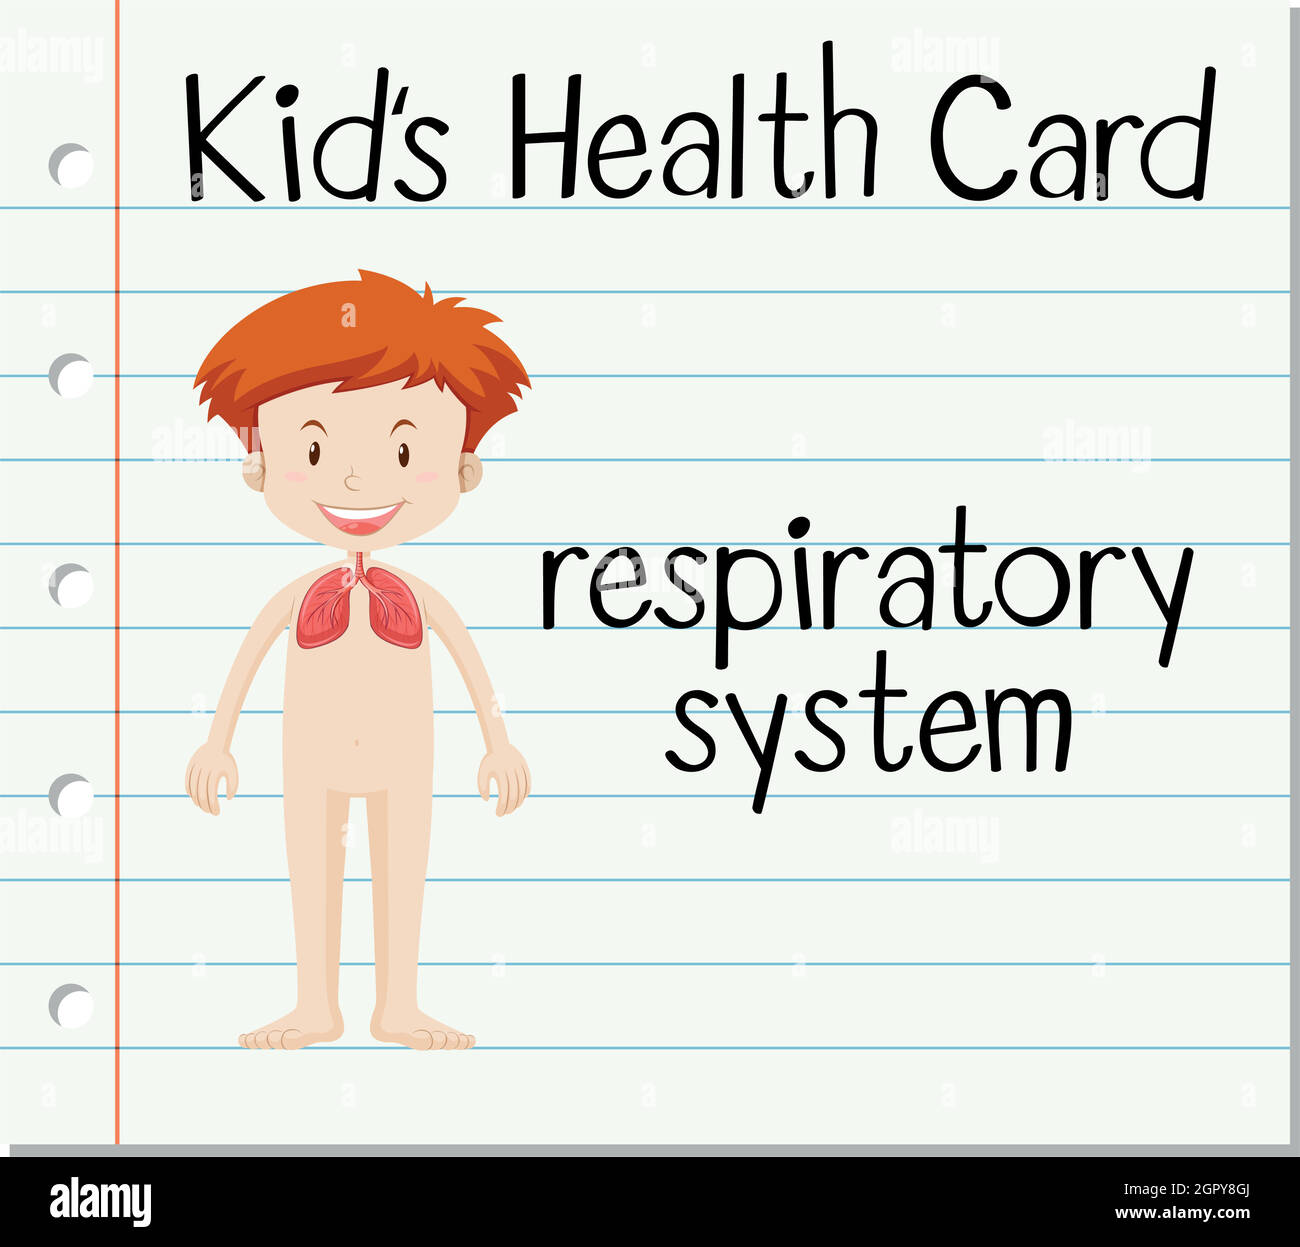 Health card with respiratory system Stock Vector